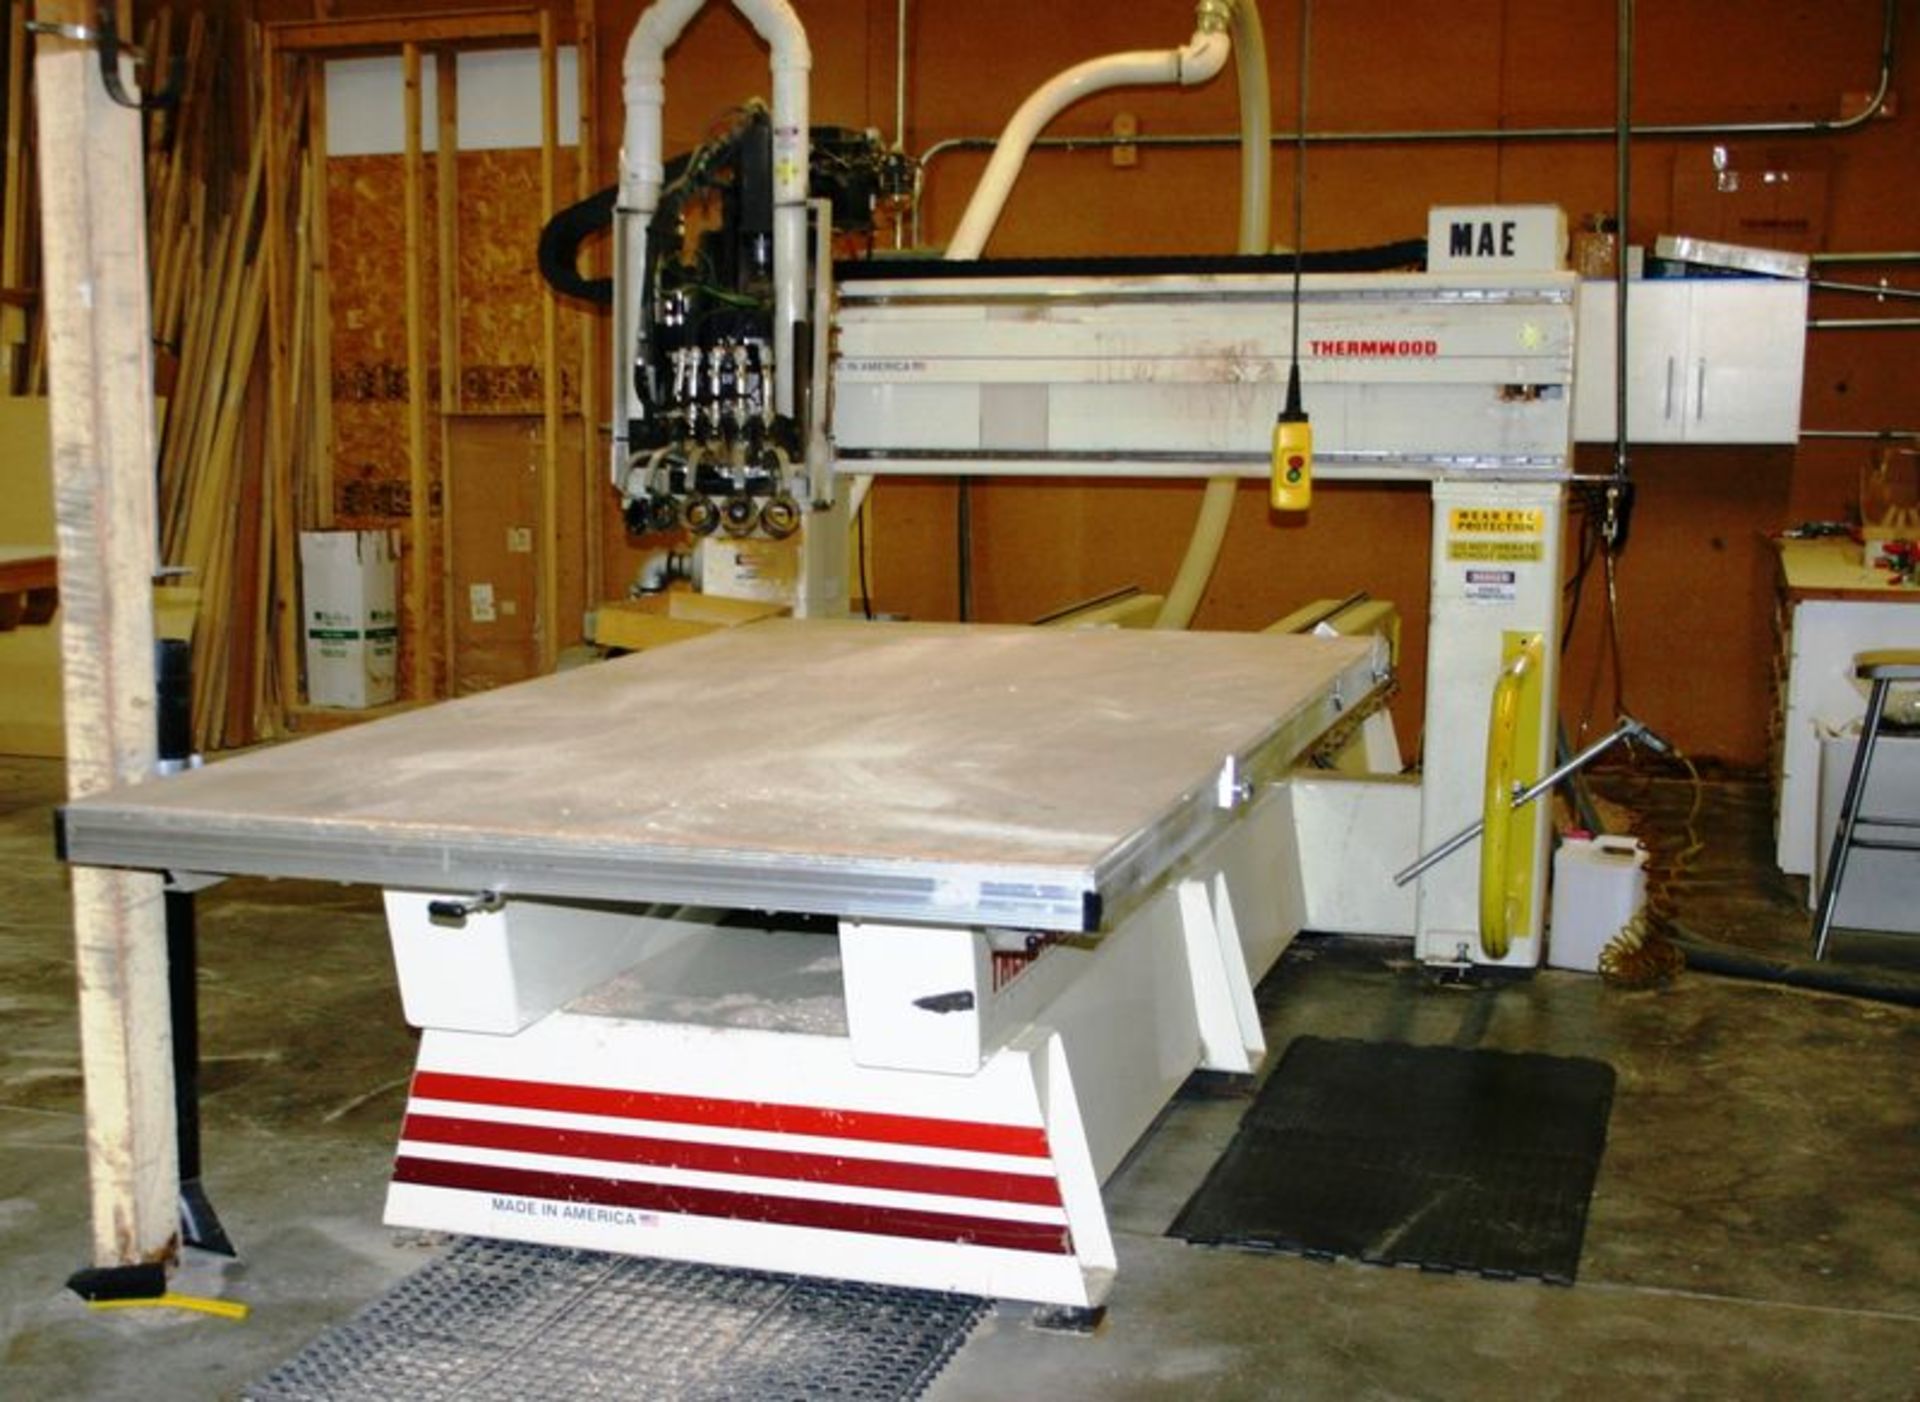 5'X10' THERMWOOD C40 4-AXIS CNC ROUTER, NEW 2000